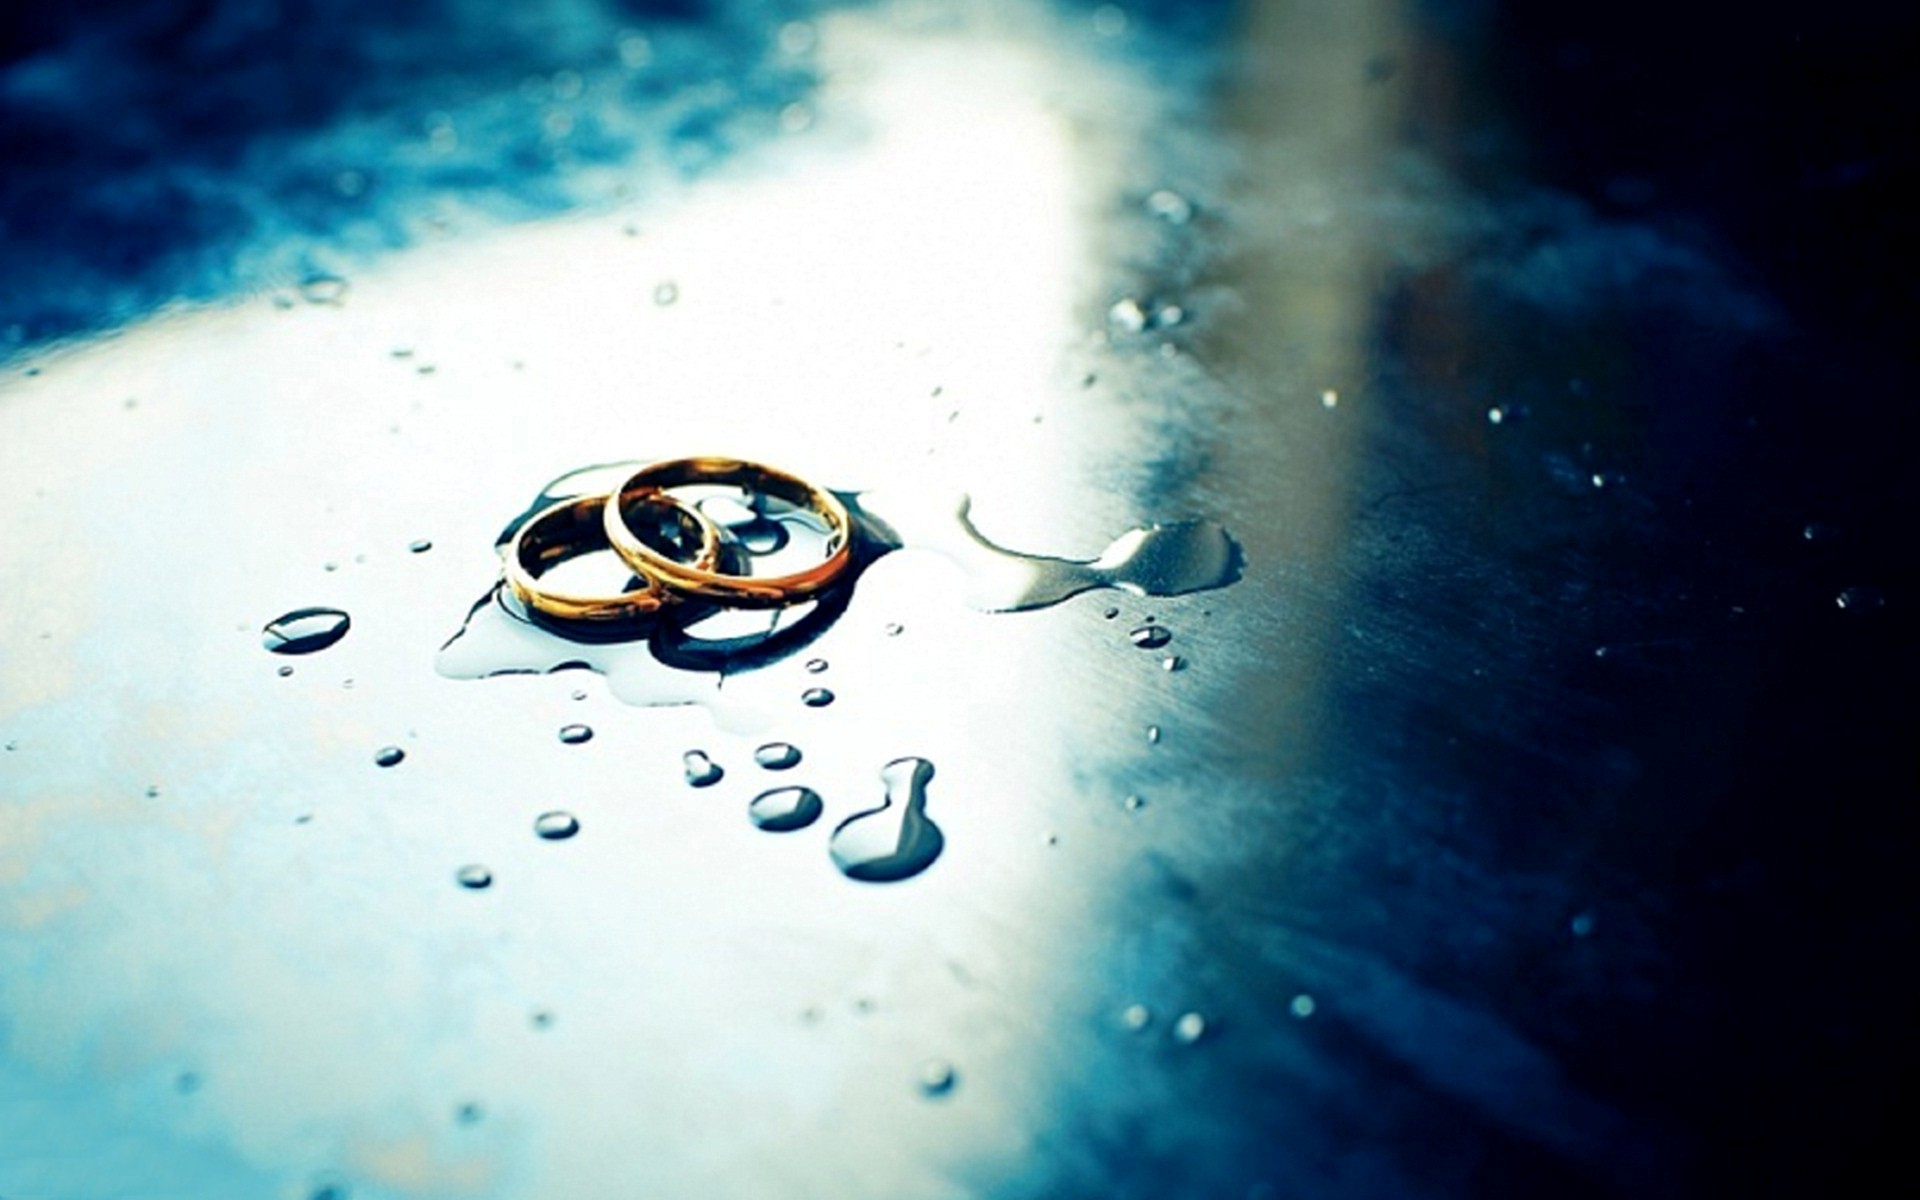 Golden Engagement Rings In Water Drops - Hd Wallpapers In Engagement - HD Wallpaper 